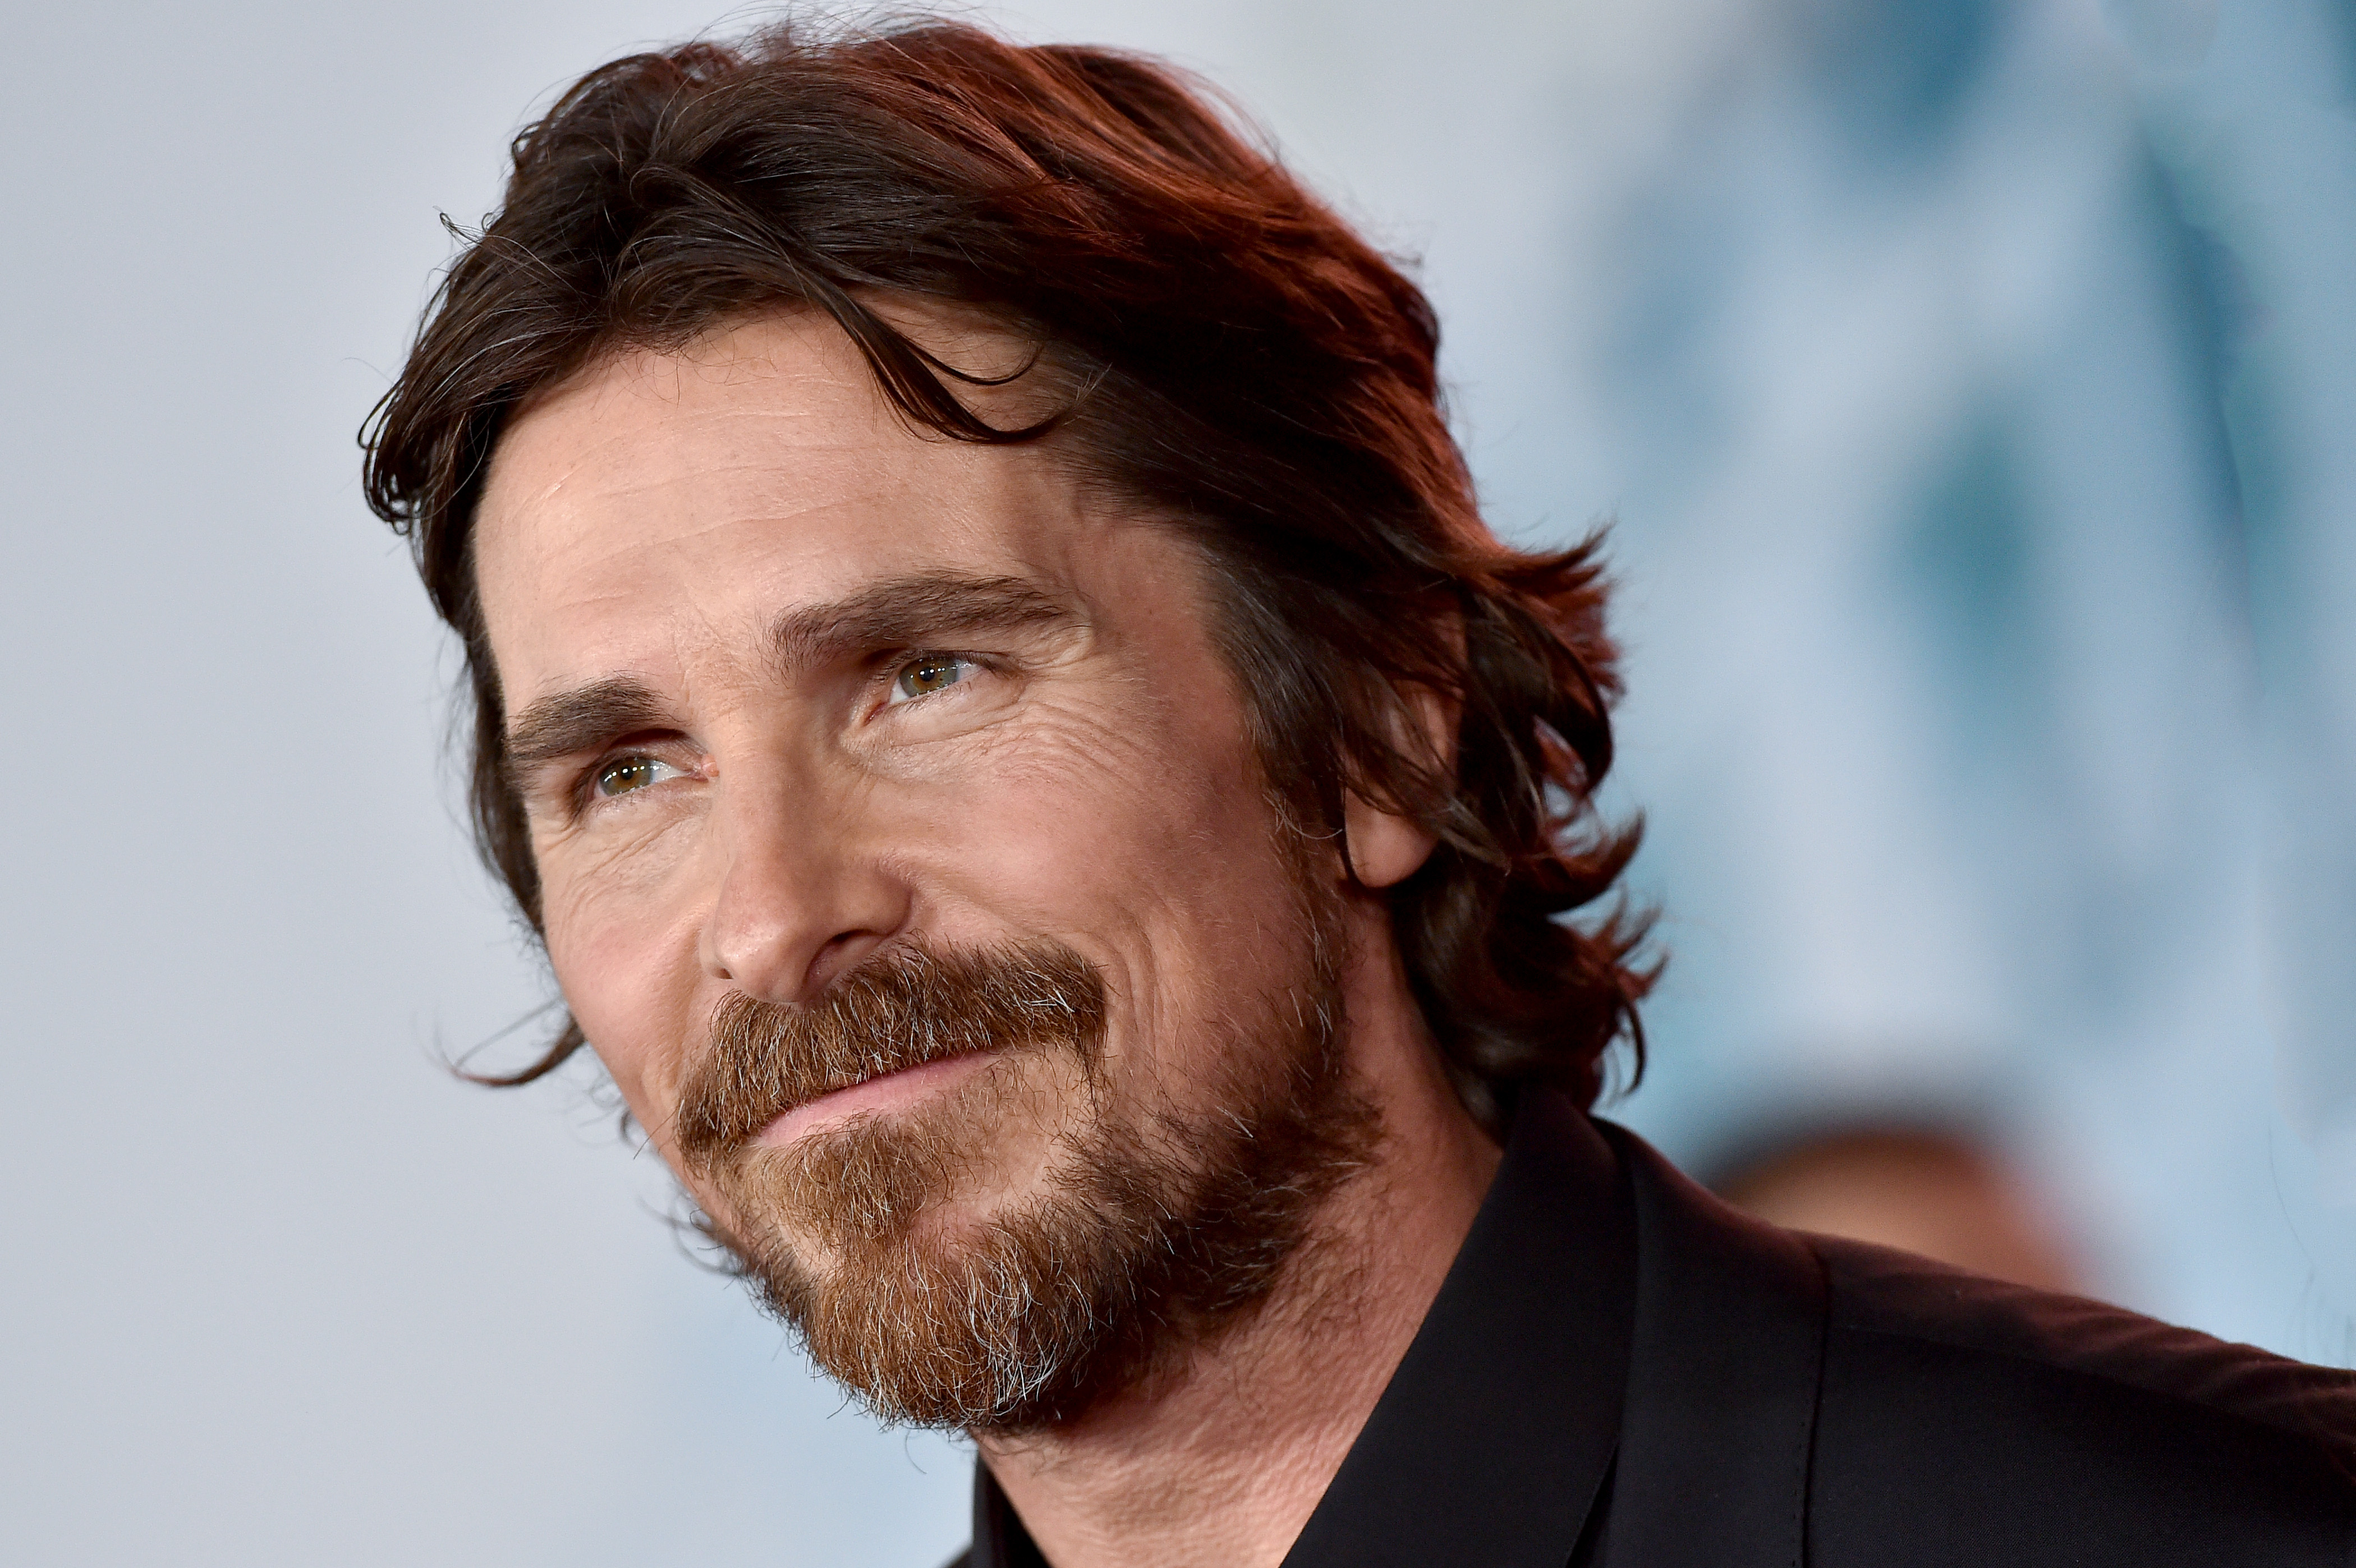 Christian Bale, who plays Gorr the God Butcher in 'Thor: Love and Thunder,' wears a black suit.